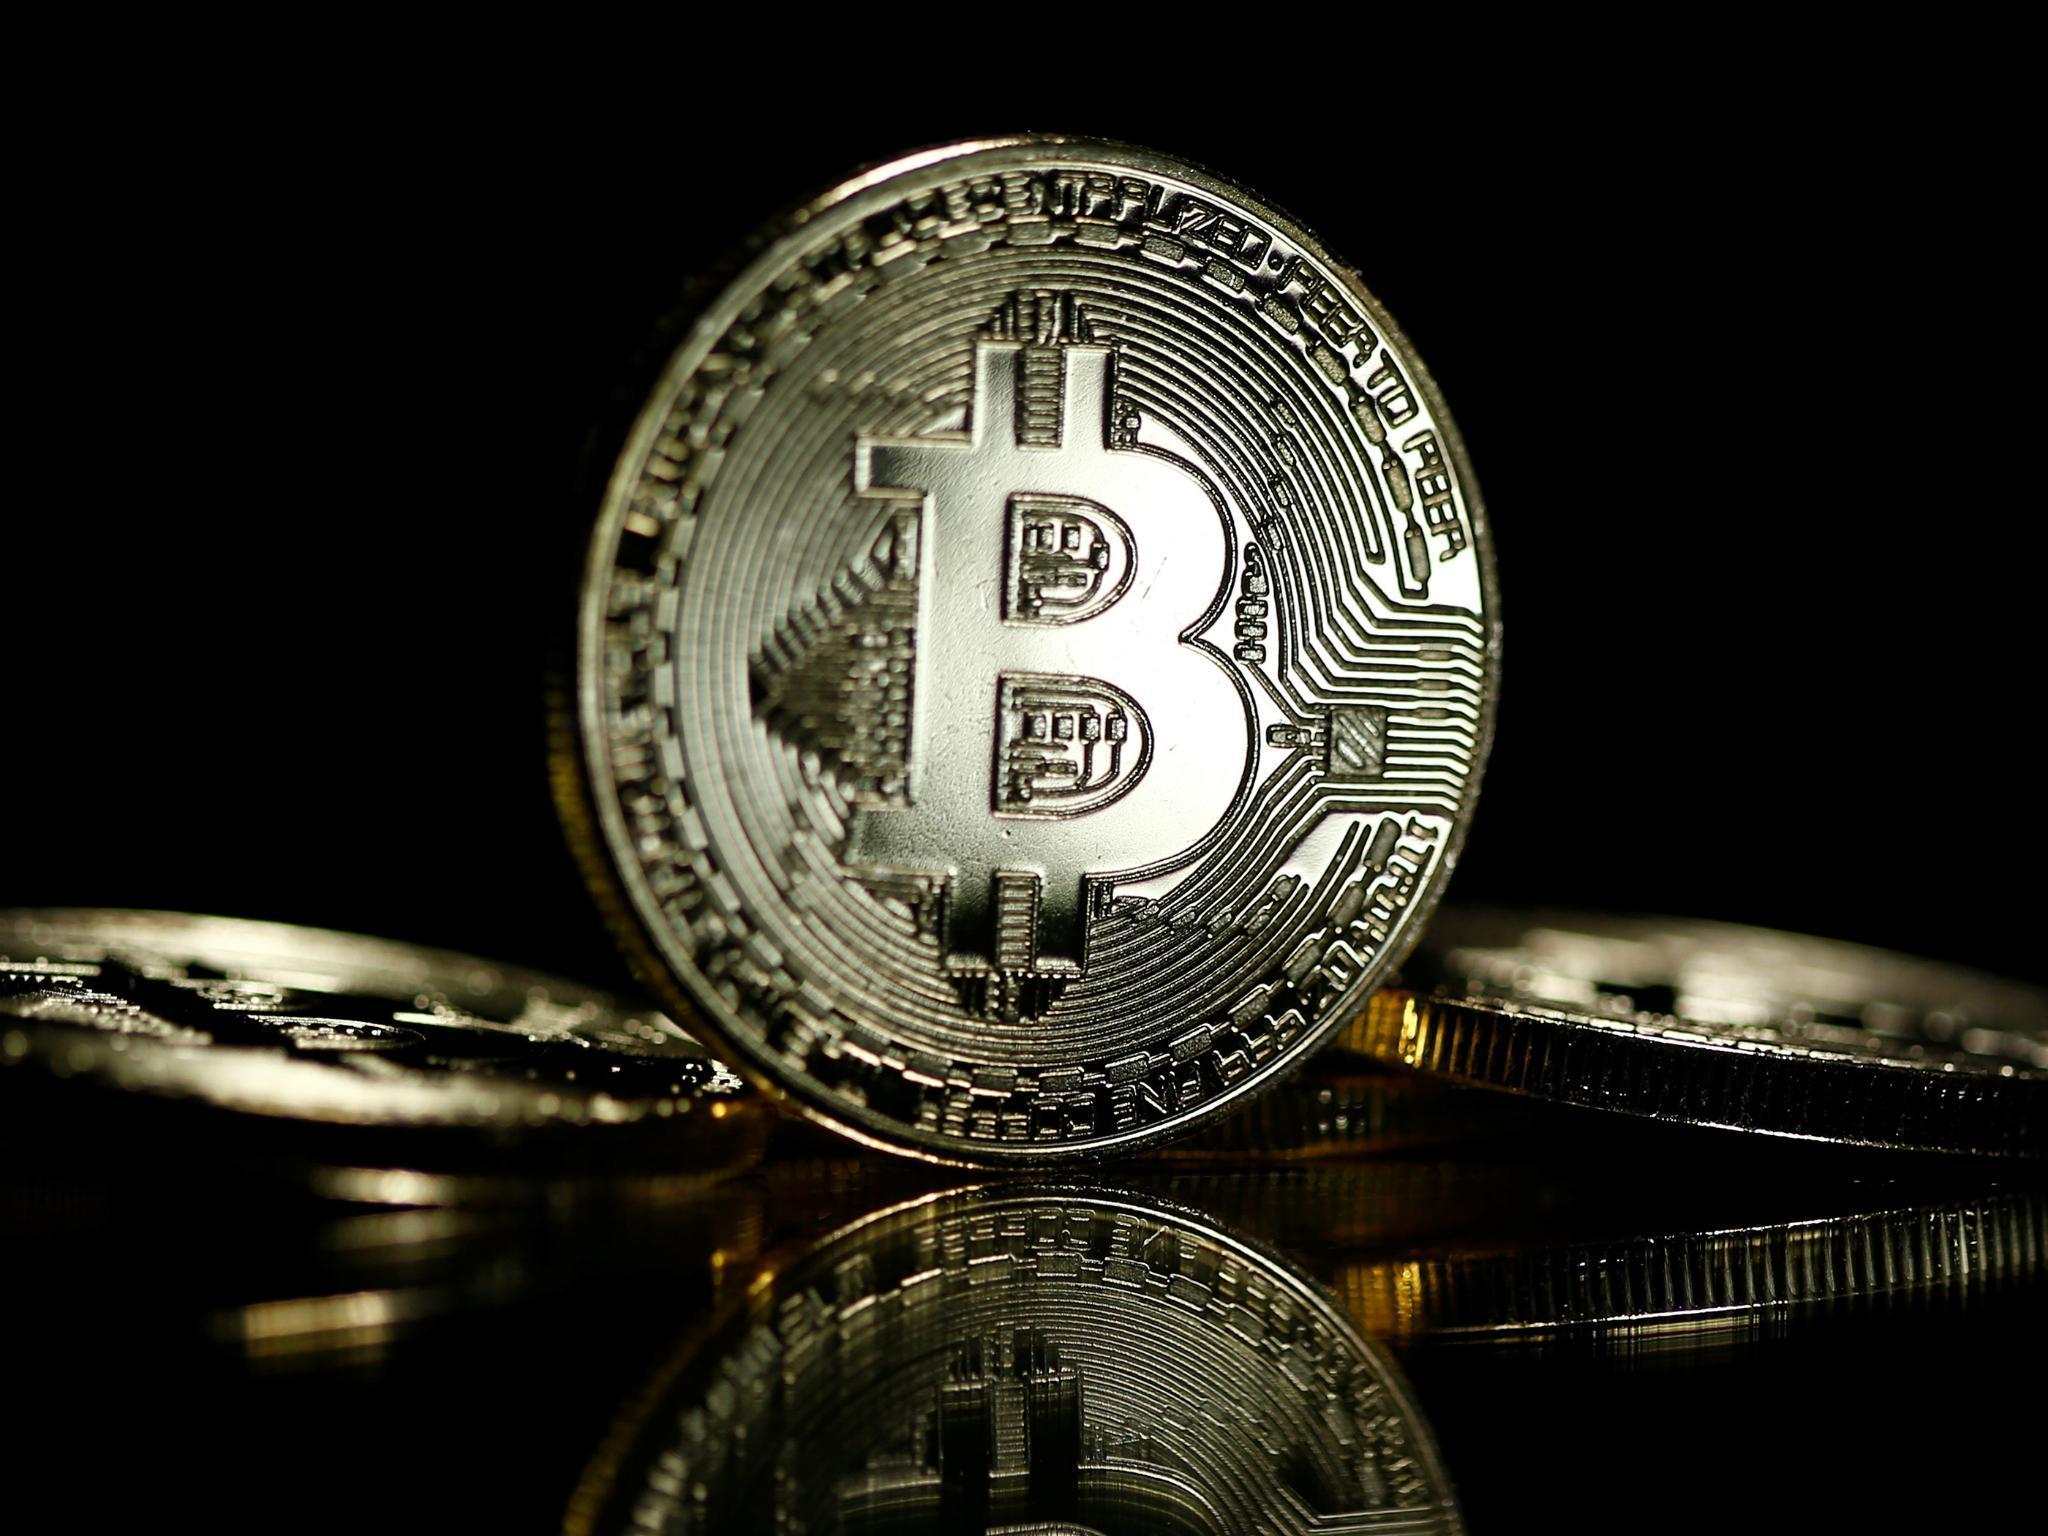 3 79 Million Bitcoin Worth 43bn Are Lost And May Never Be Found - 